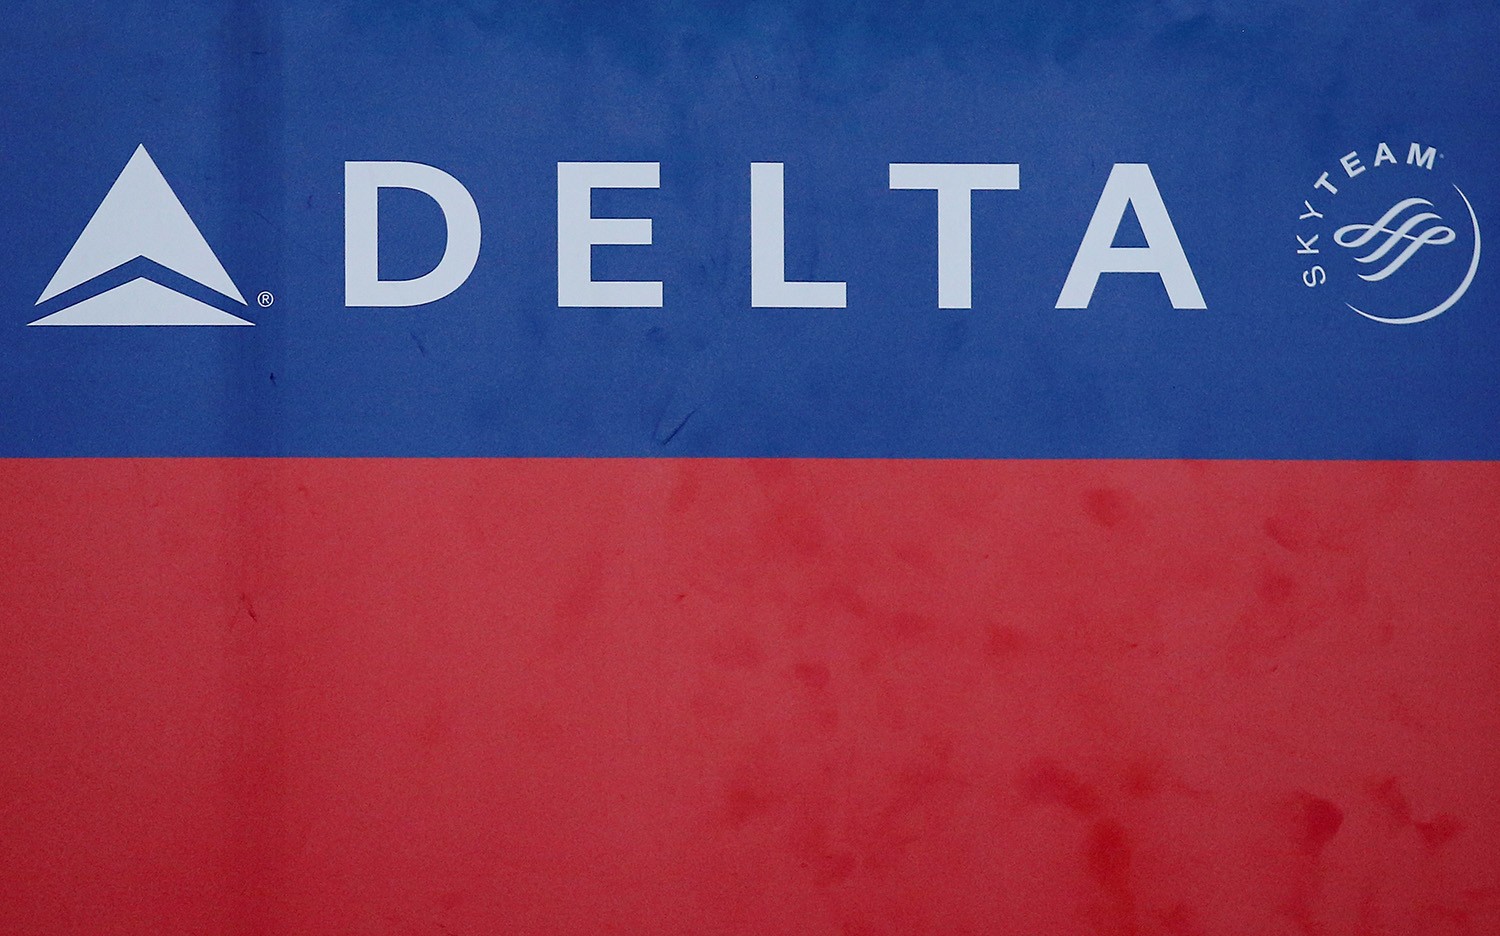 The Delta airlines logo. Photo: Reuters